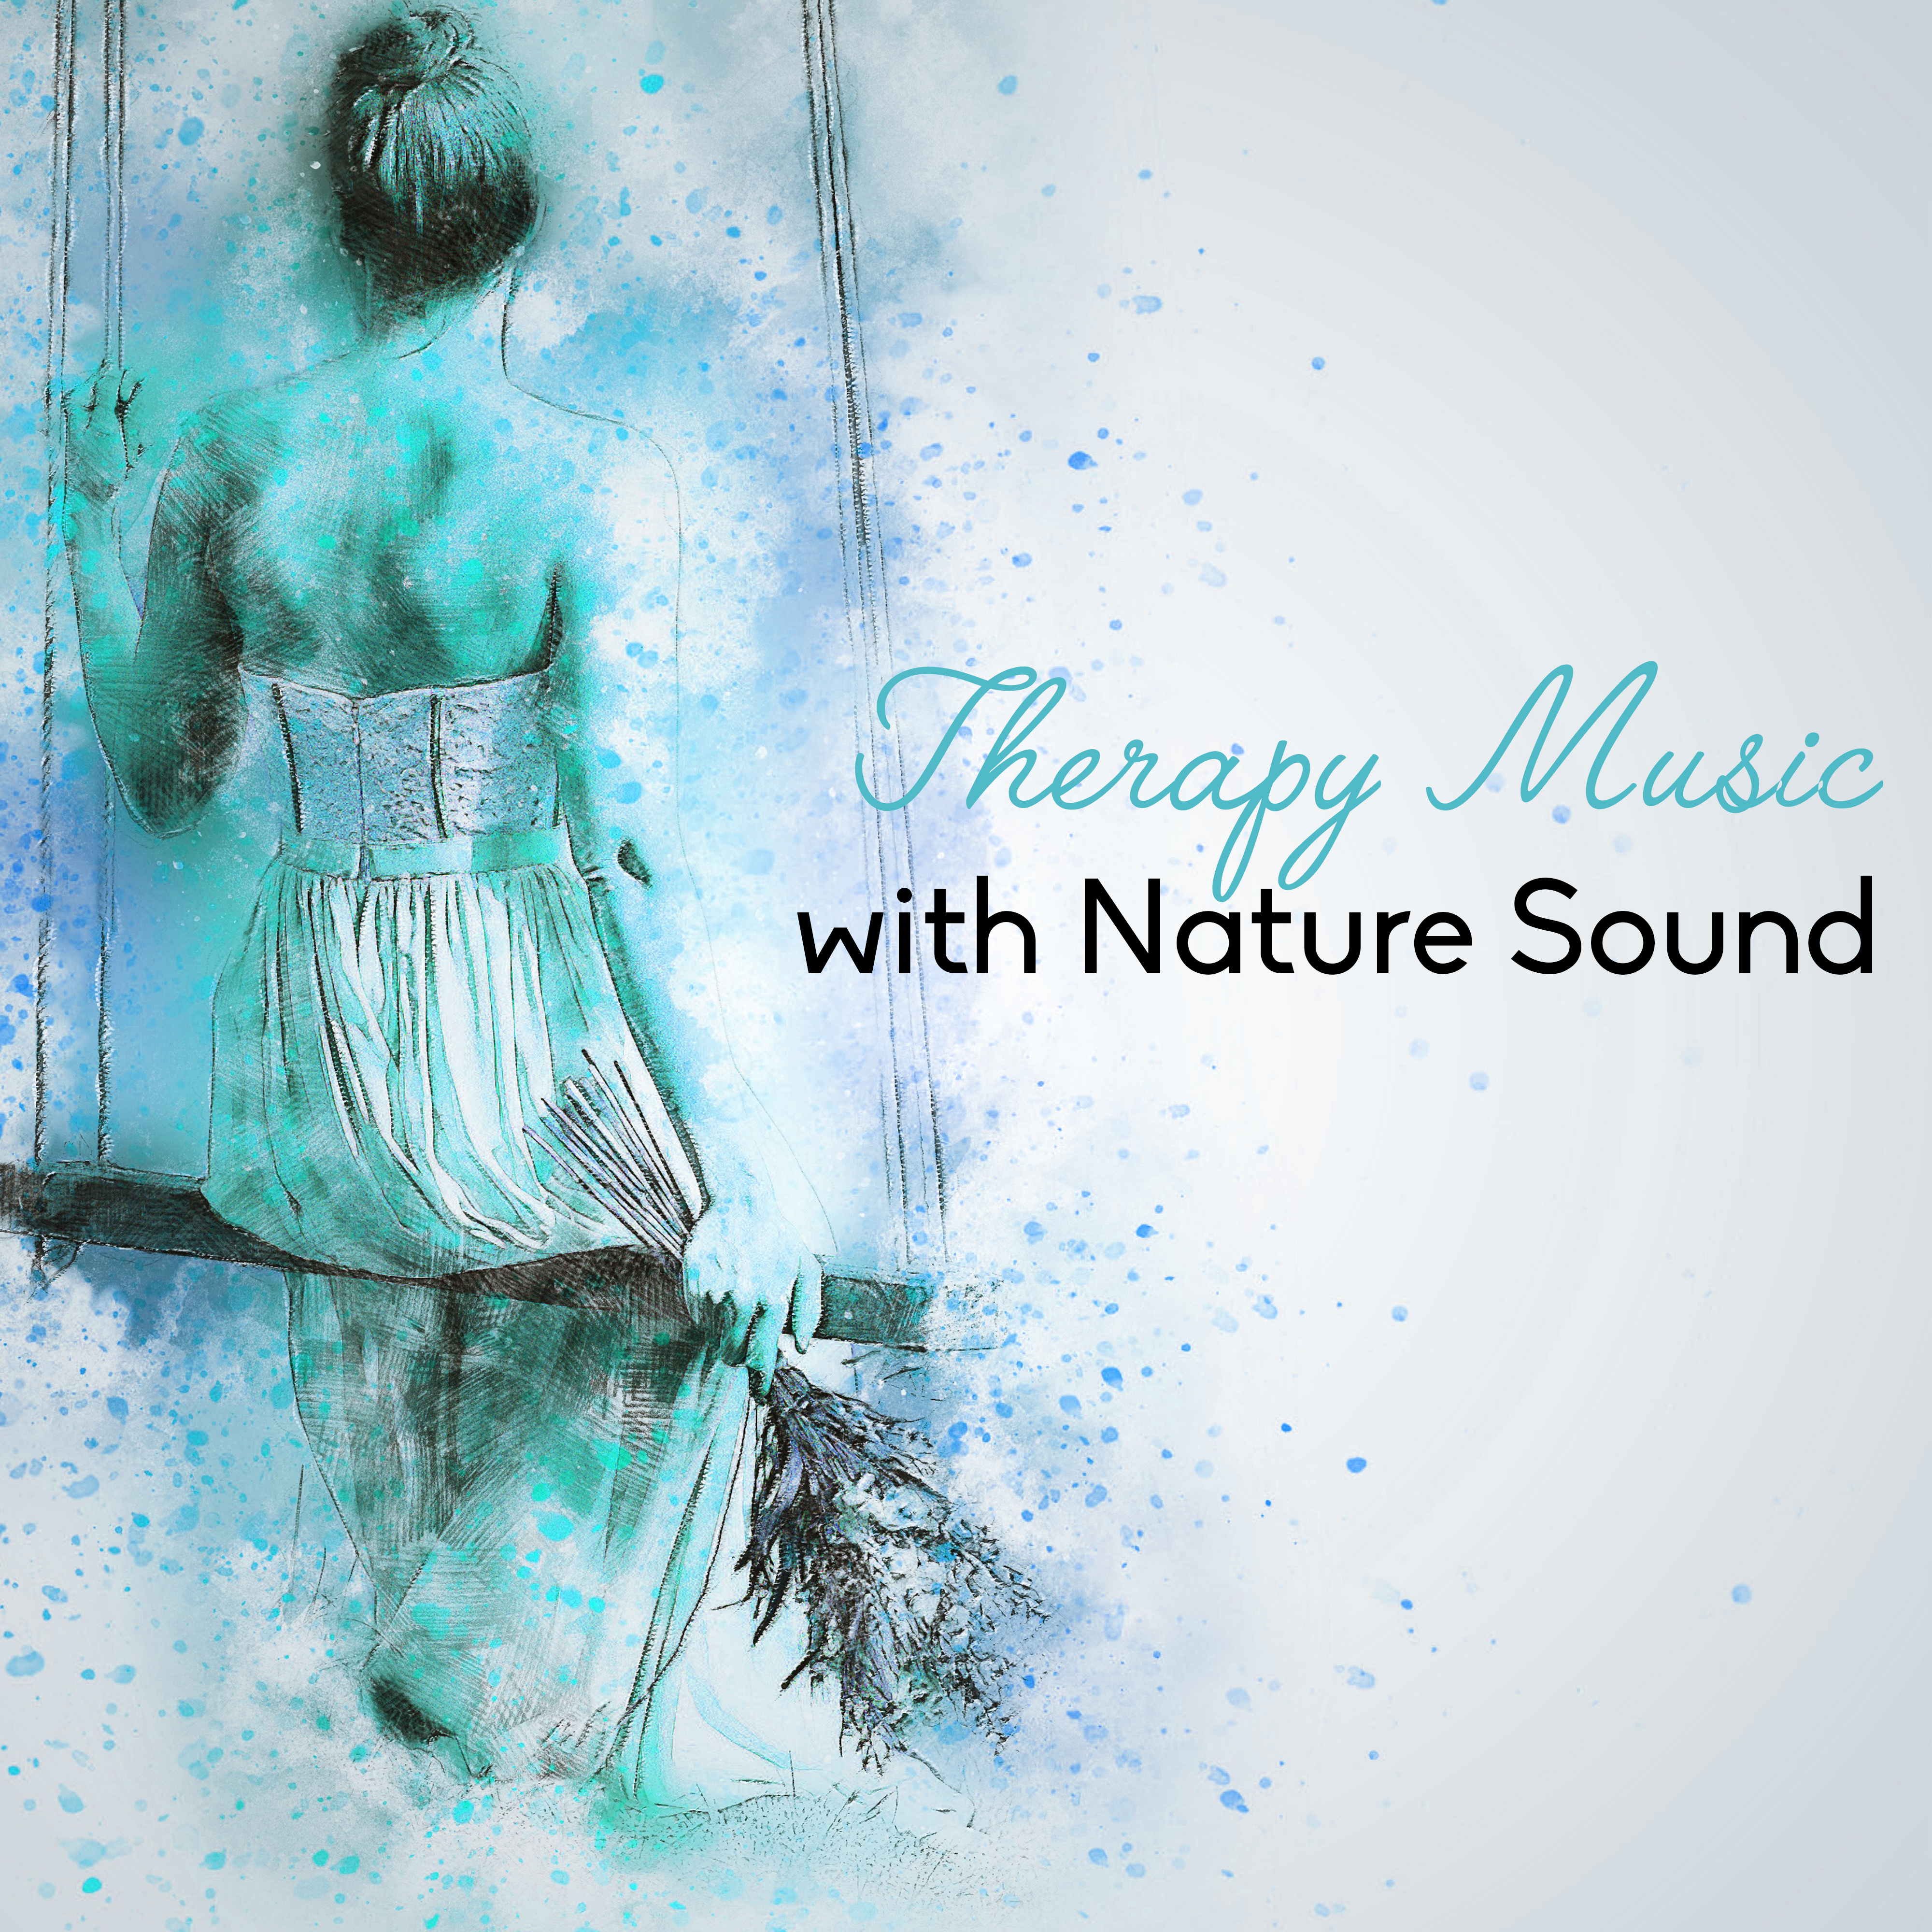 Therapy Music with Nature Sound  Calming Music to Stress Relief, Inner Calmness, Soothing Waves, Nature Relaxation